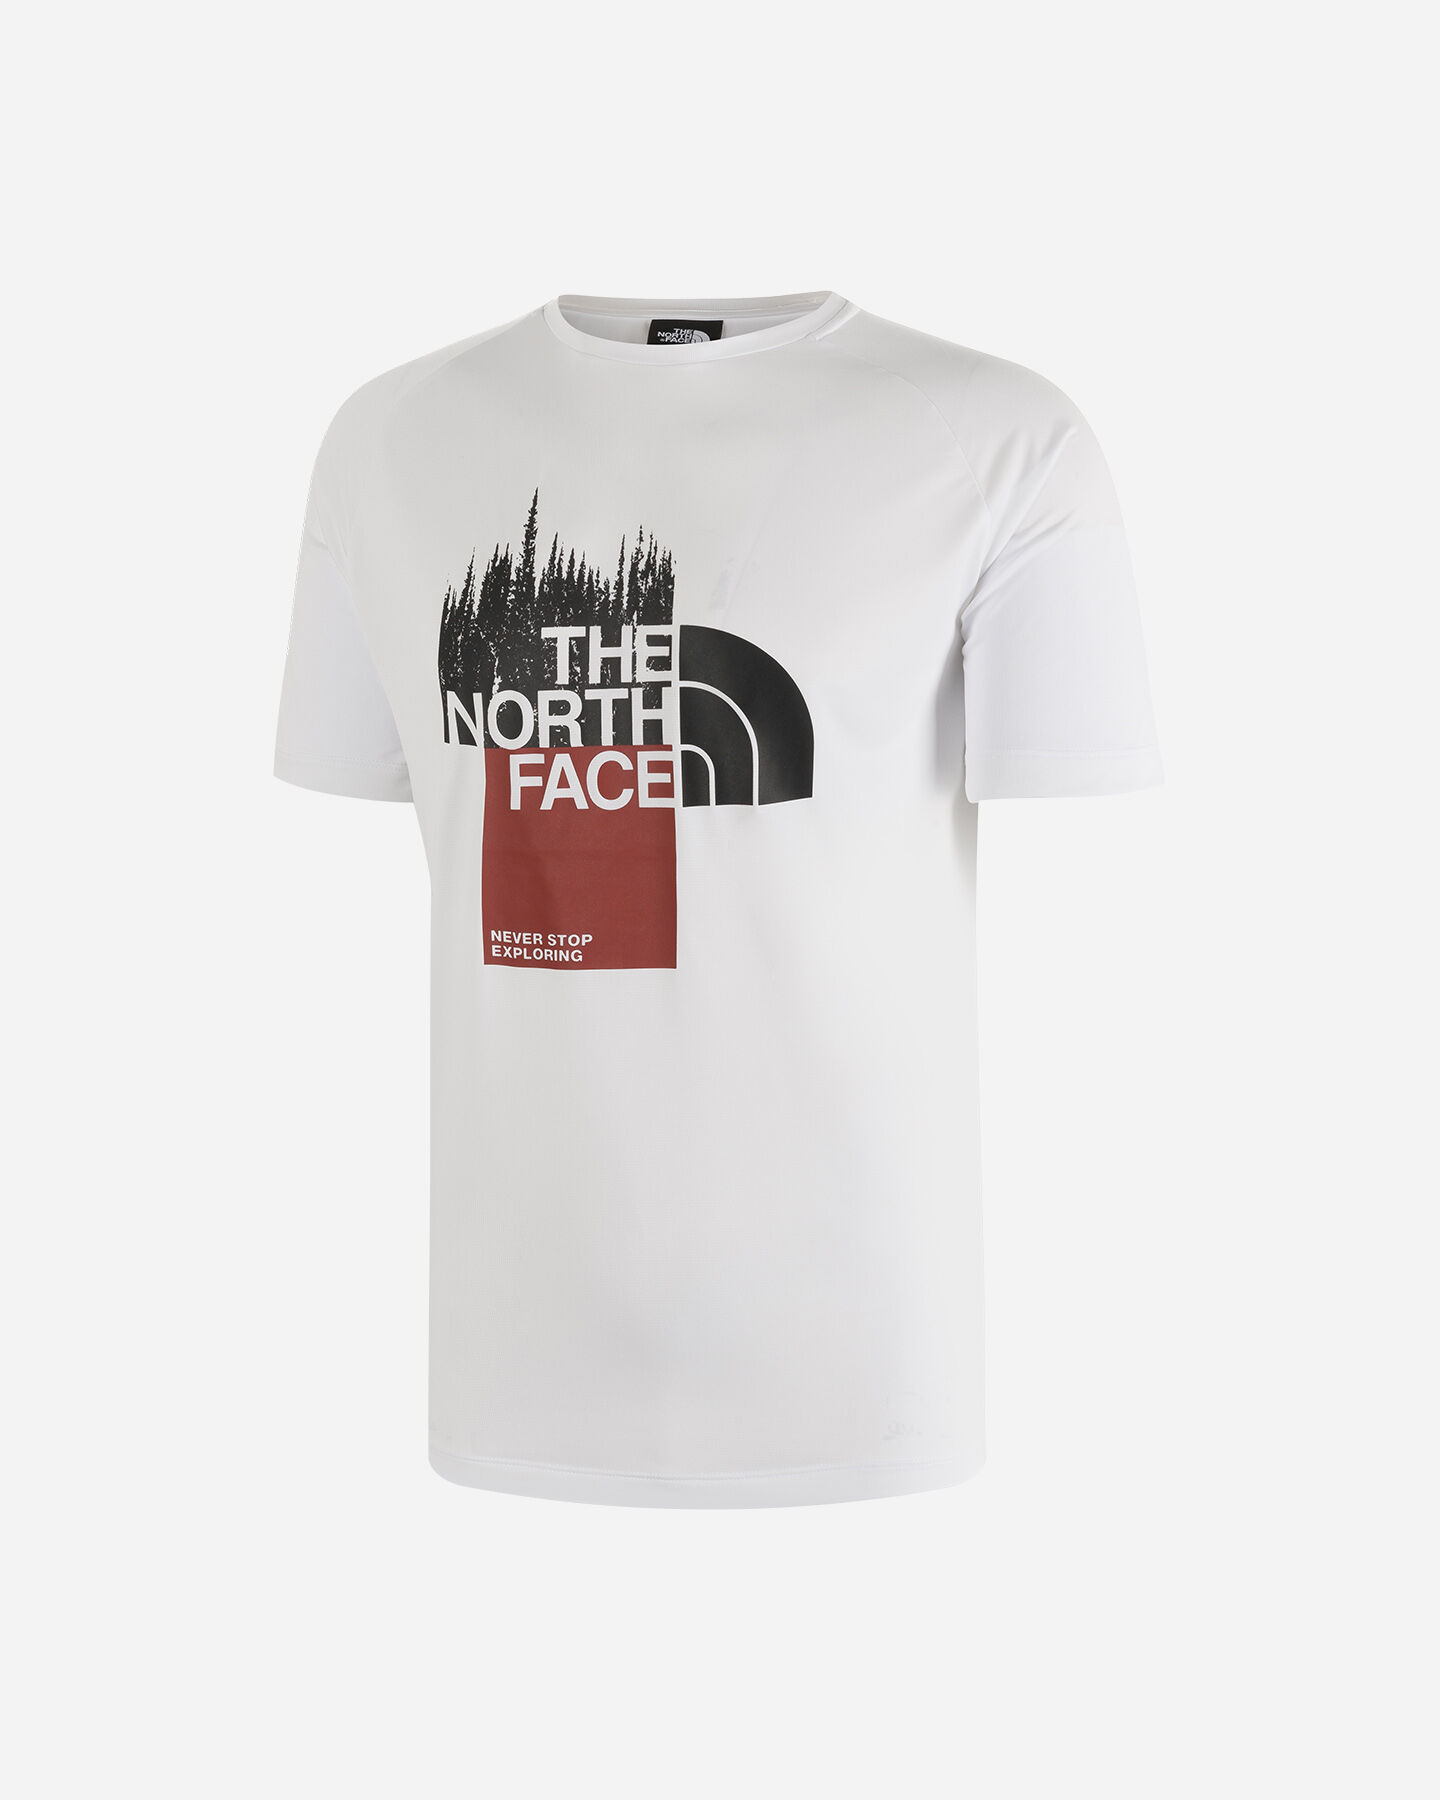  T-Shirt THE NORTH FACE ODLES TECH M S5430742|50D|S scatto 0